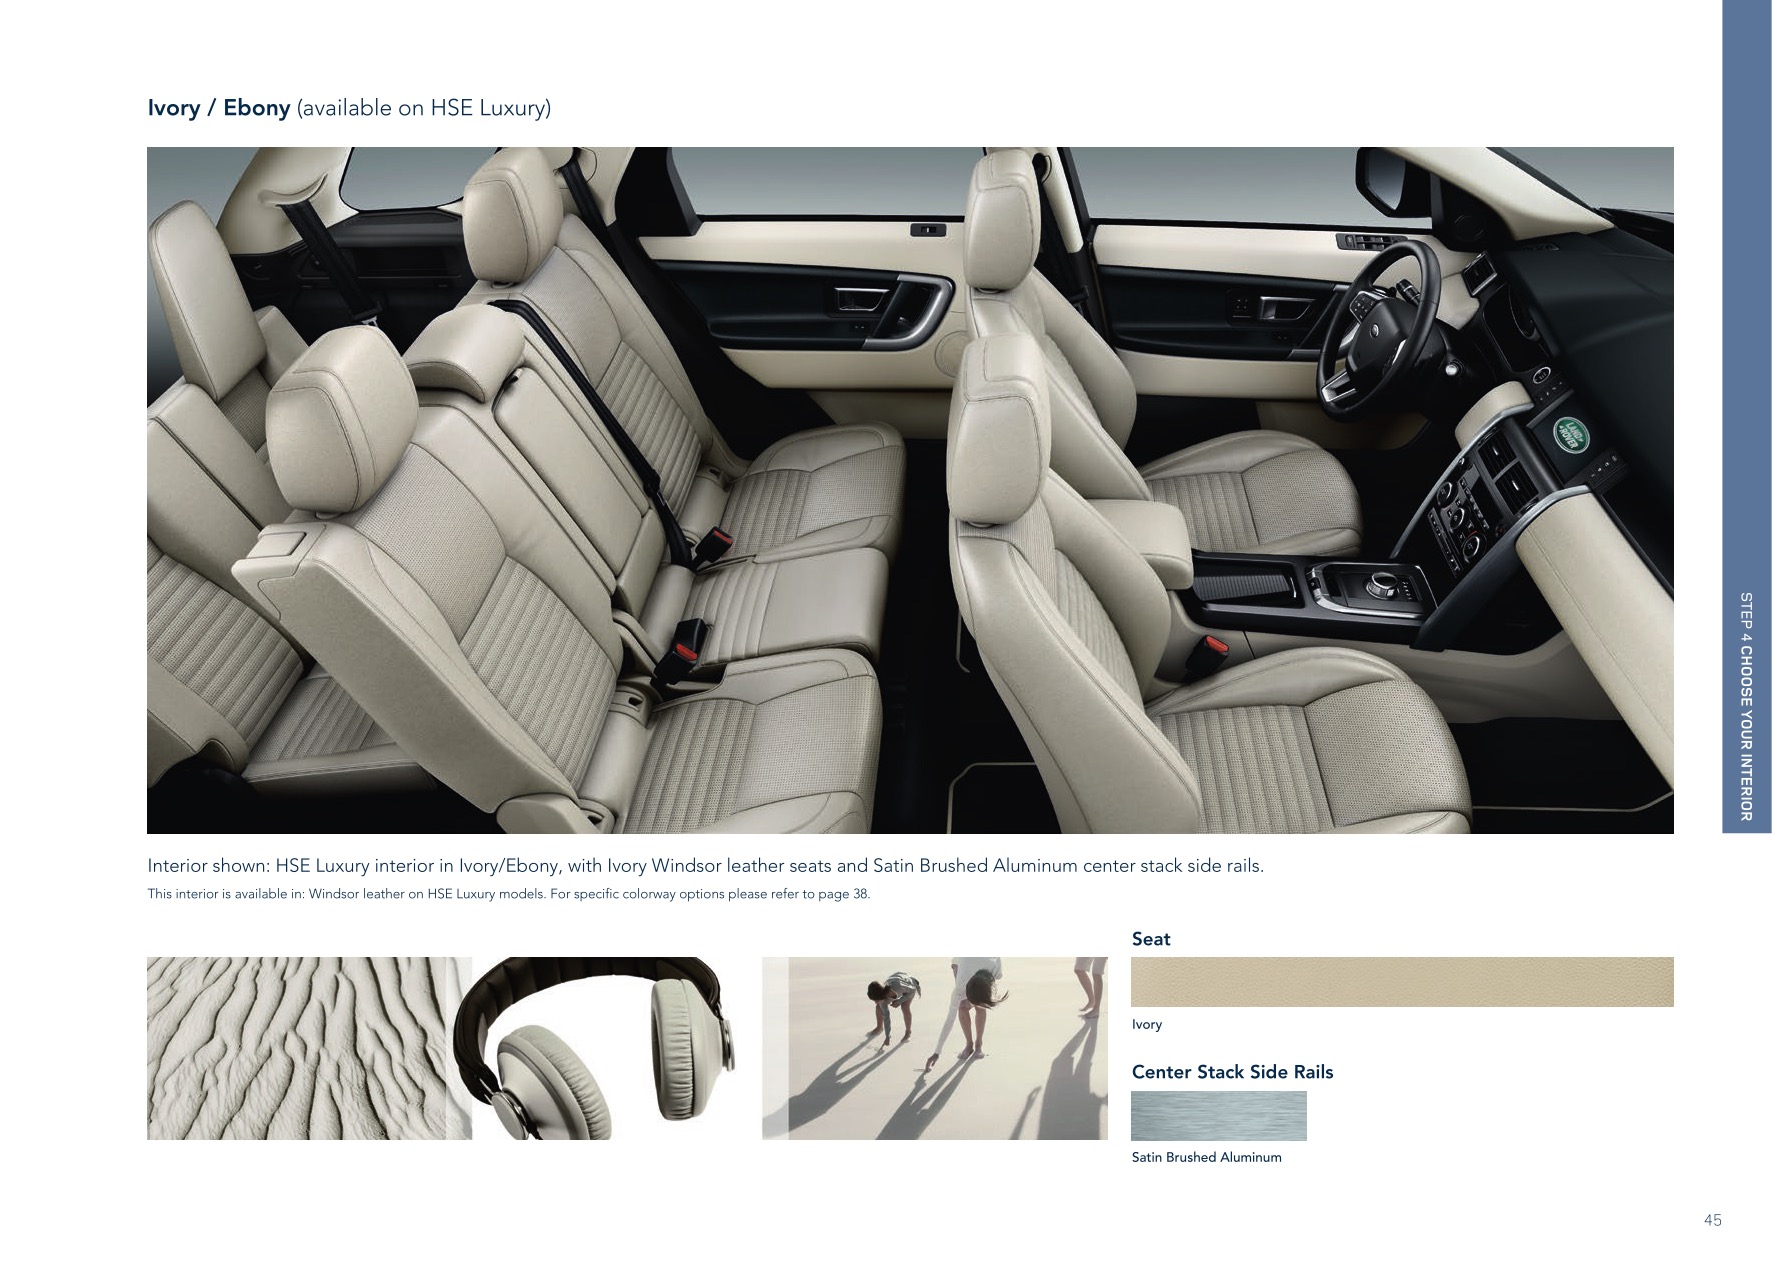 2015 Land Rover Discovery Sport Brochure Page 15